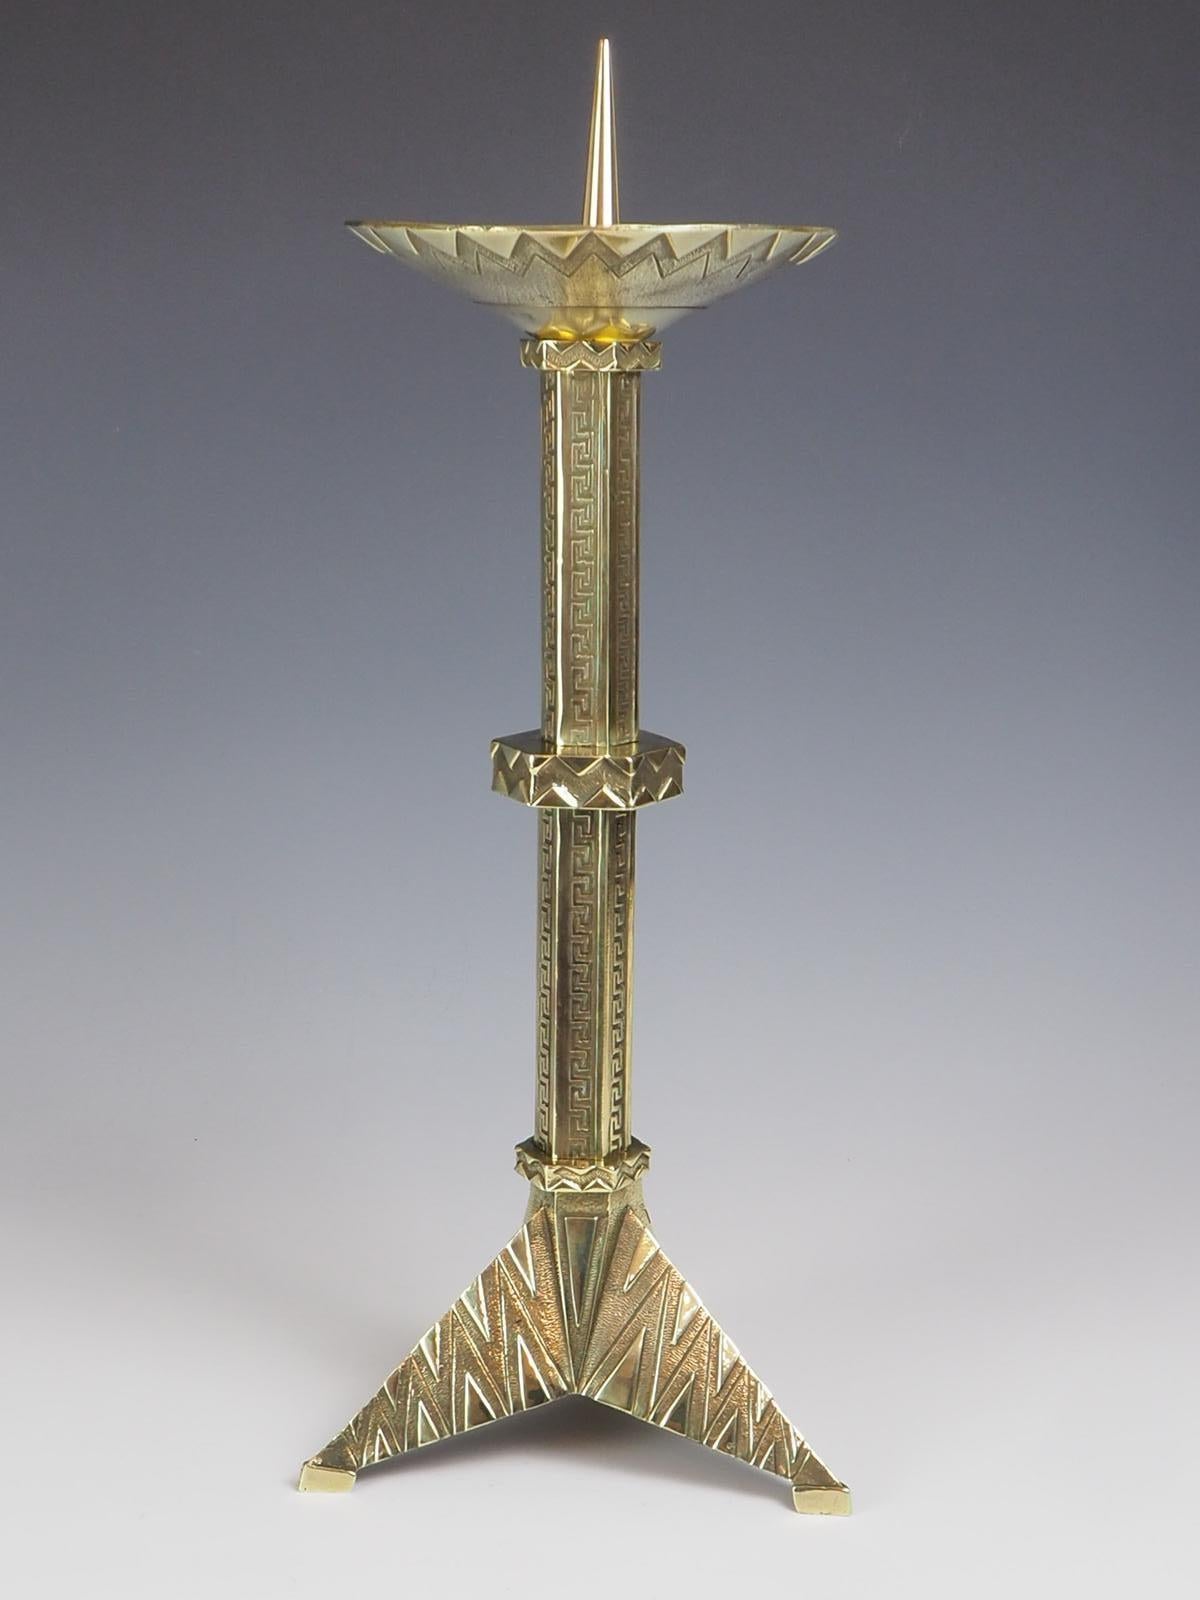 20th Century Antique French Brass Geometric Art Deco Pricket Candlestick For Sale